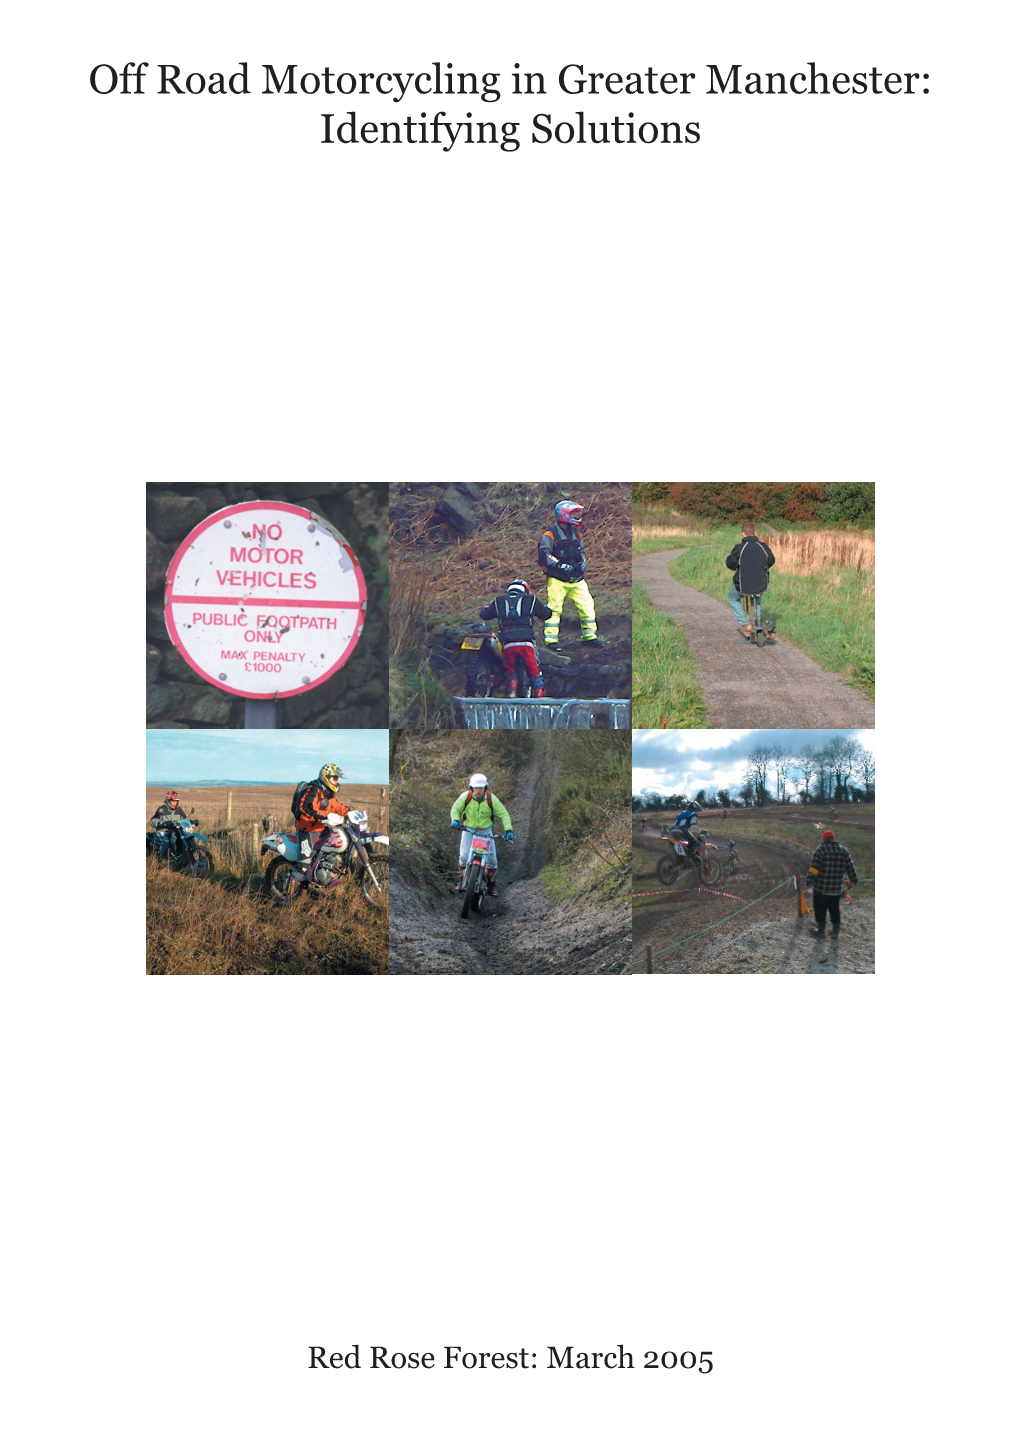 Off Road Motorcycling in Greater Manchester: Identifying Solutions